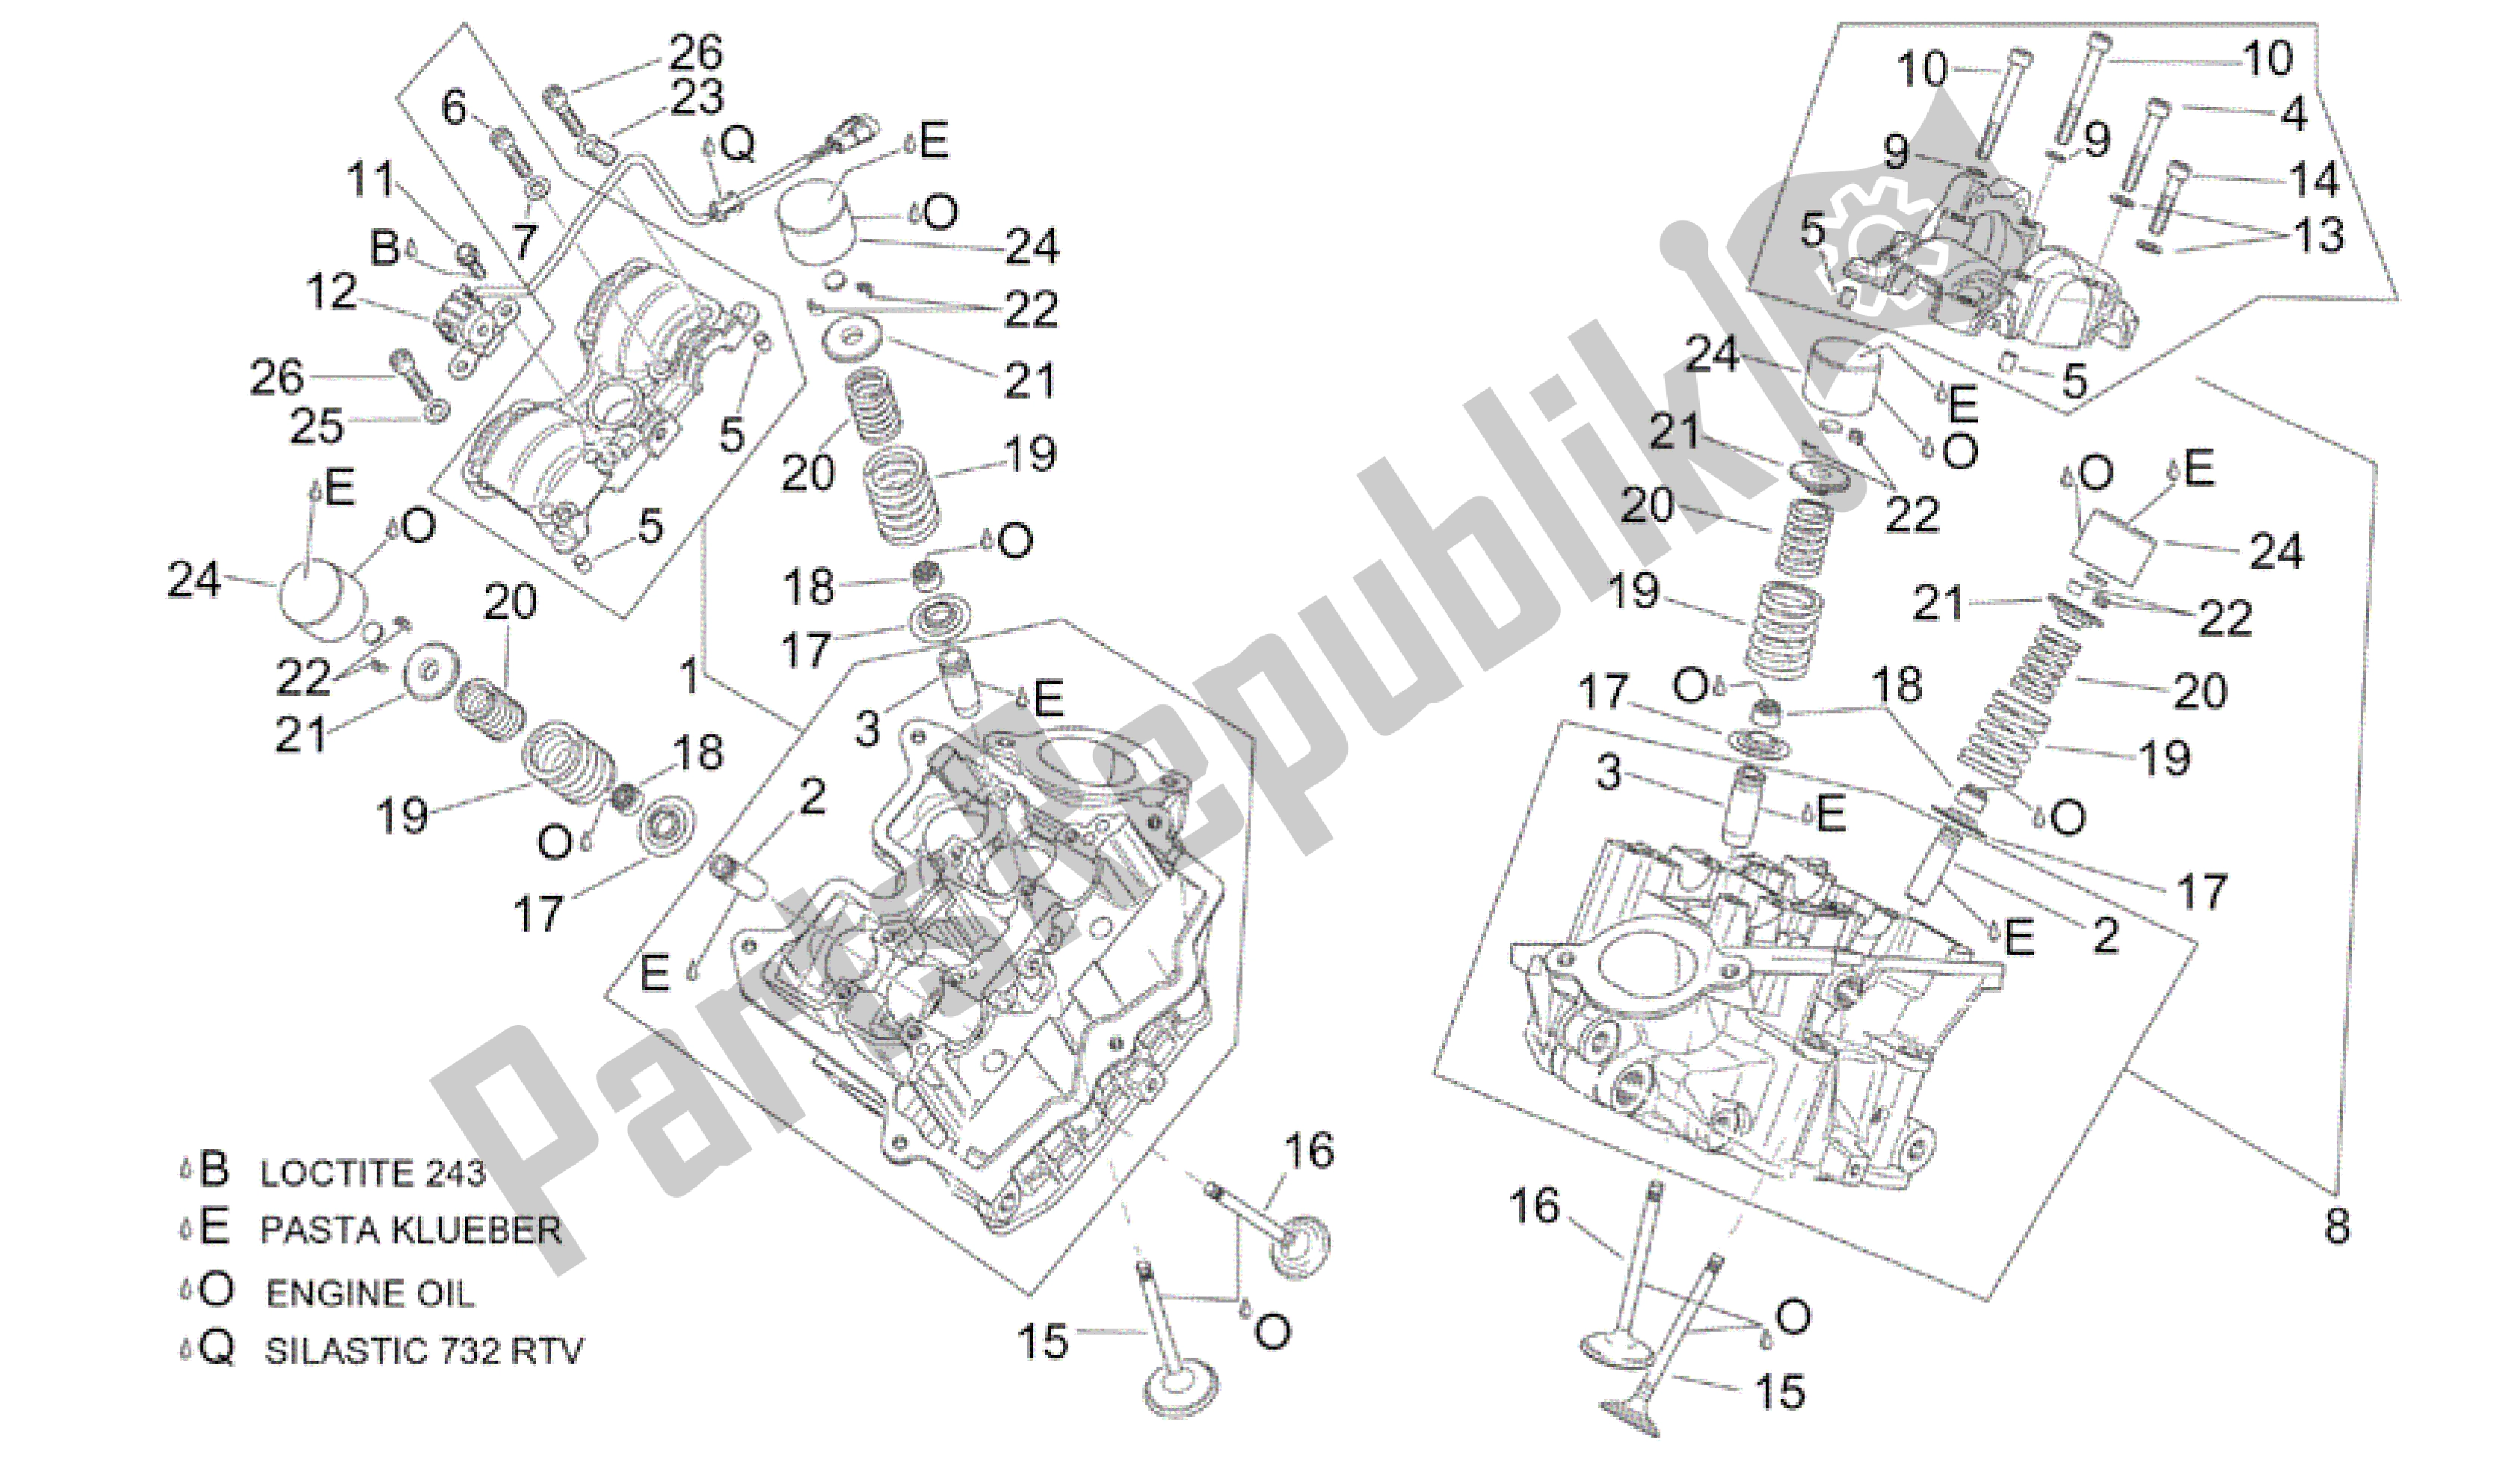 All parts for the Cylinder Head And Valves of the Aprilia RSV Tuono RS 1000 2004 - 2005